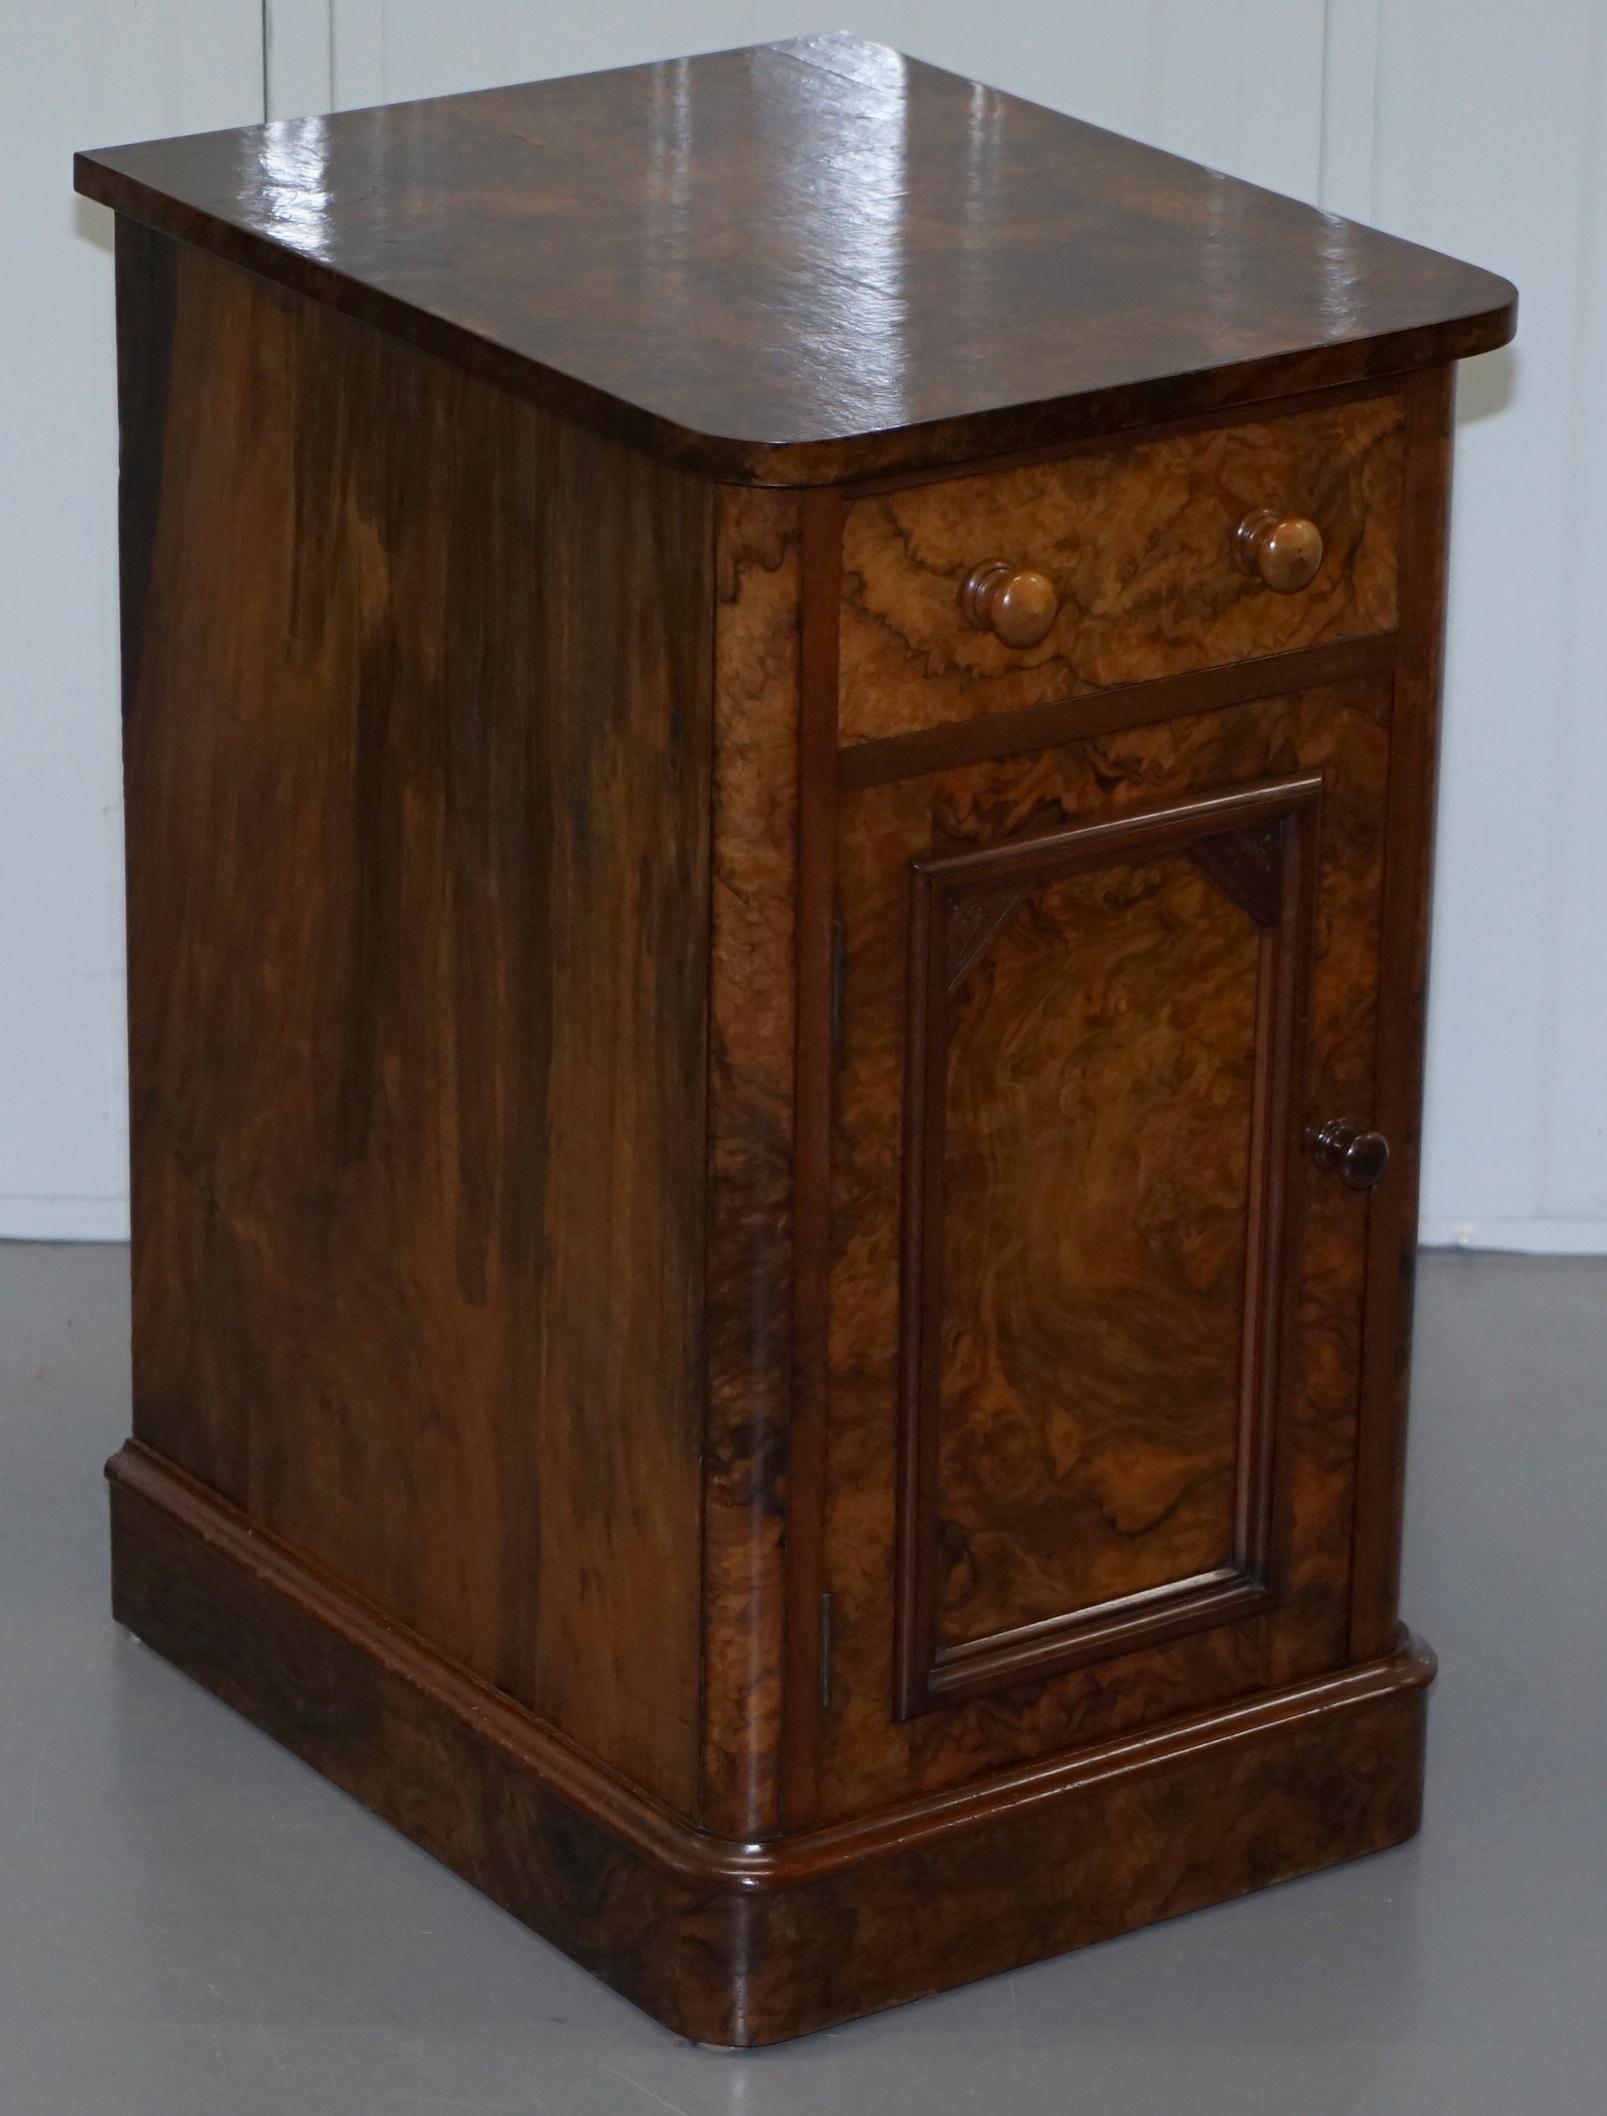 We are delighted to this absolutely stunning pair of circa 1890 Victorian Burr walnut side tables with single drawer from the great company of Collinge’s Burnley

This is part of a suite, the full set includes a stunning dressing table, pair of